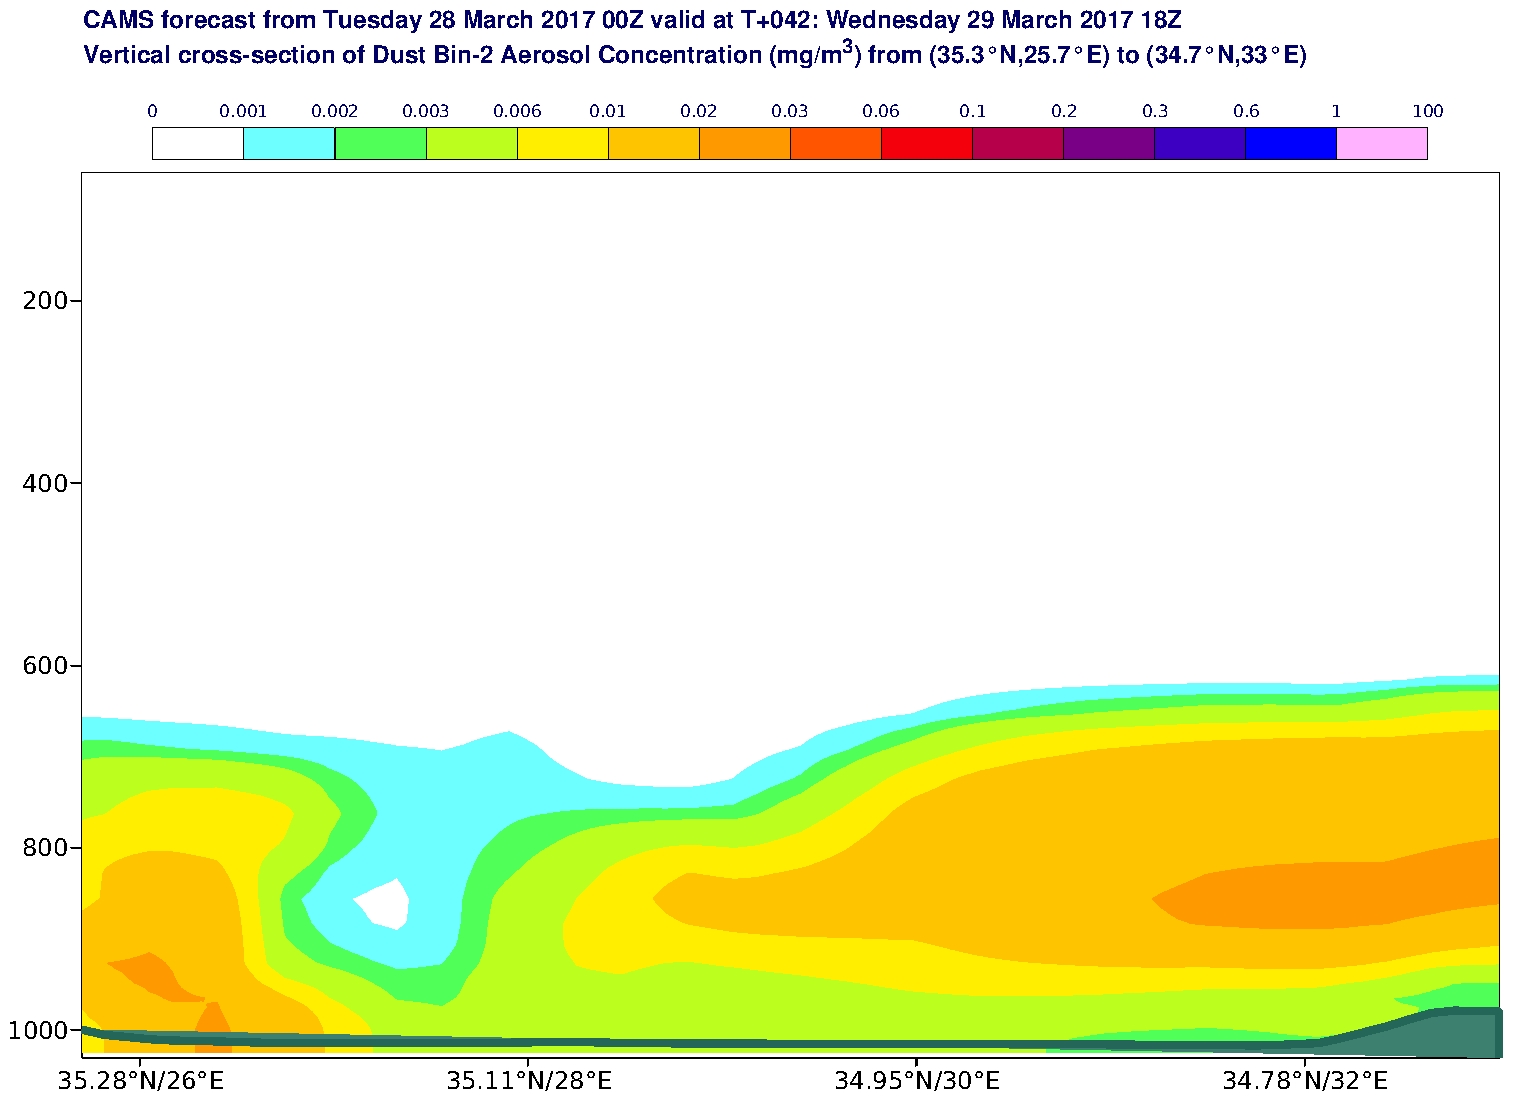 Vertical cross-section of Dust Bin-2 Aerosol Concentration (mg/m3) valid at T42 - 2017-03-29 18:00